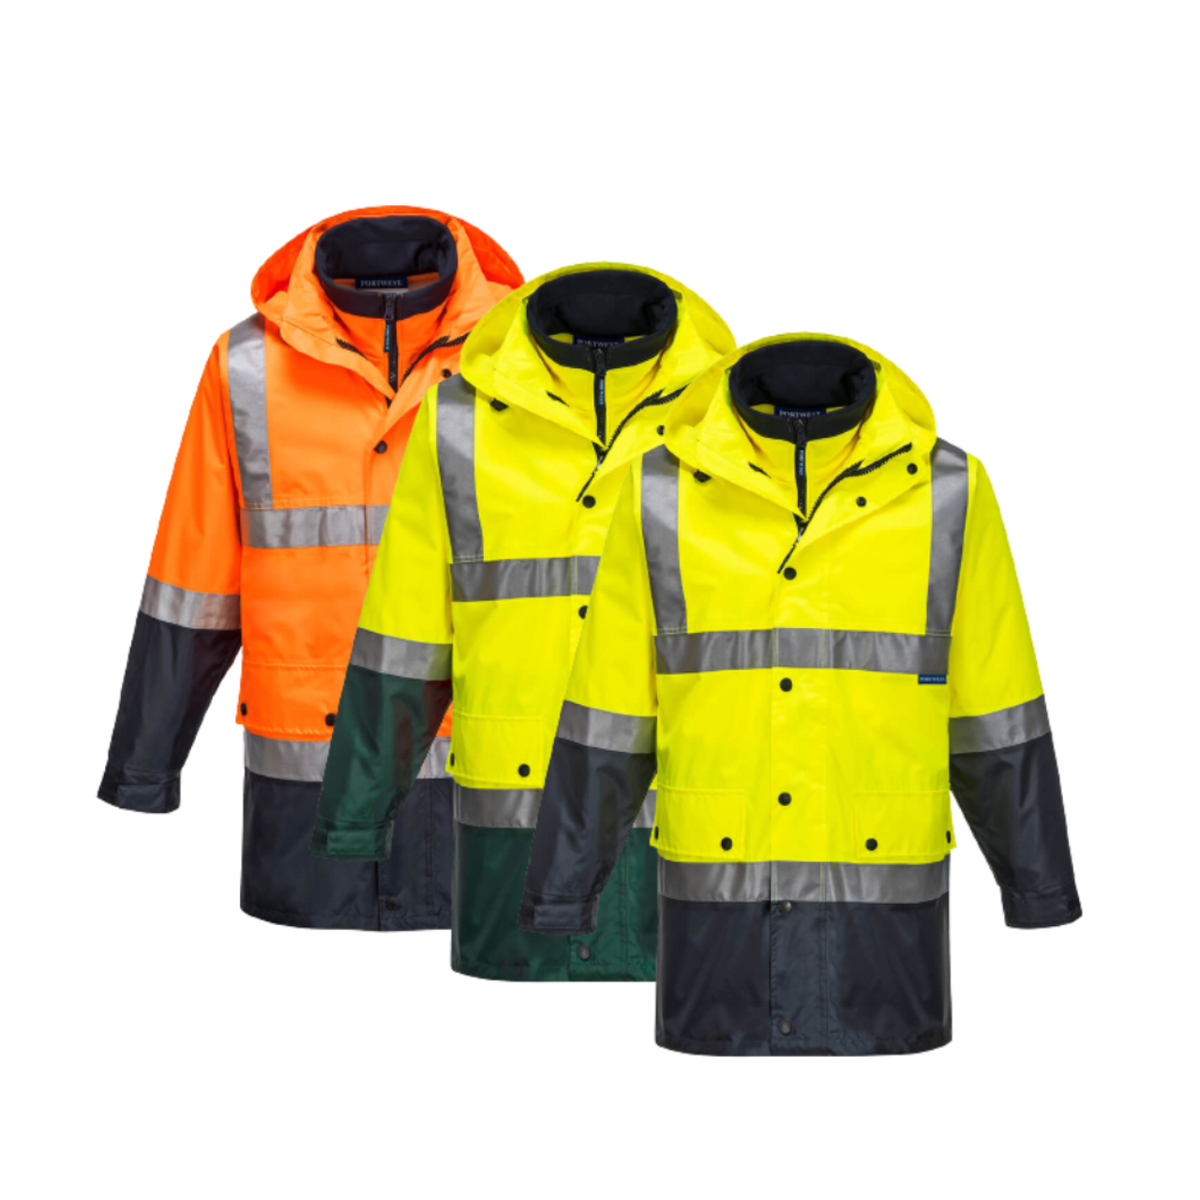 Portwest Eyre Day/Night 4-in-1 Jacket 2 Tone Reflective Work Safety MJ881-Collins Clothing Co